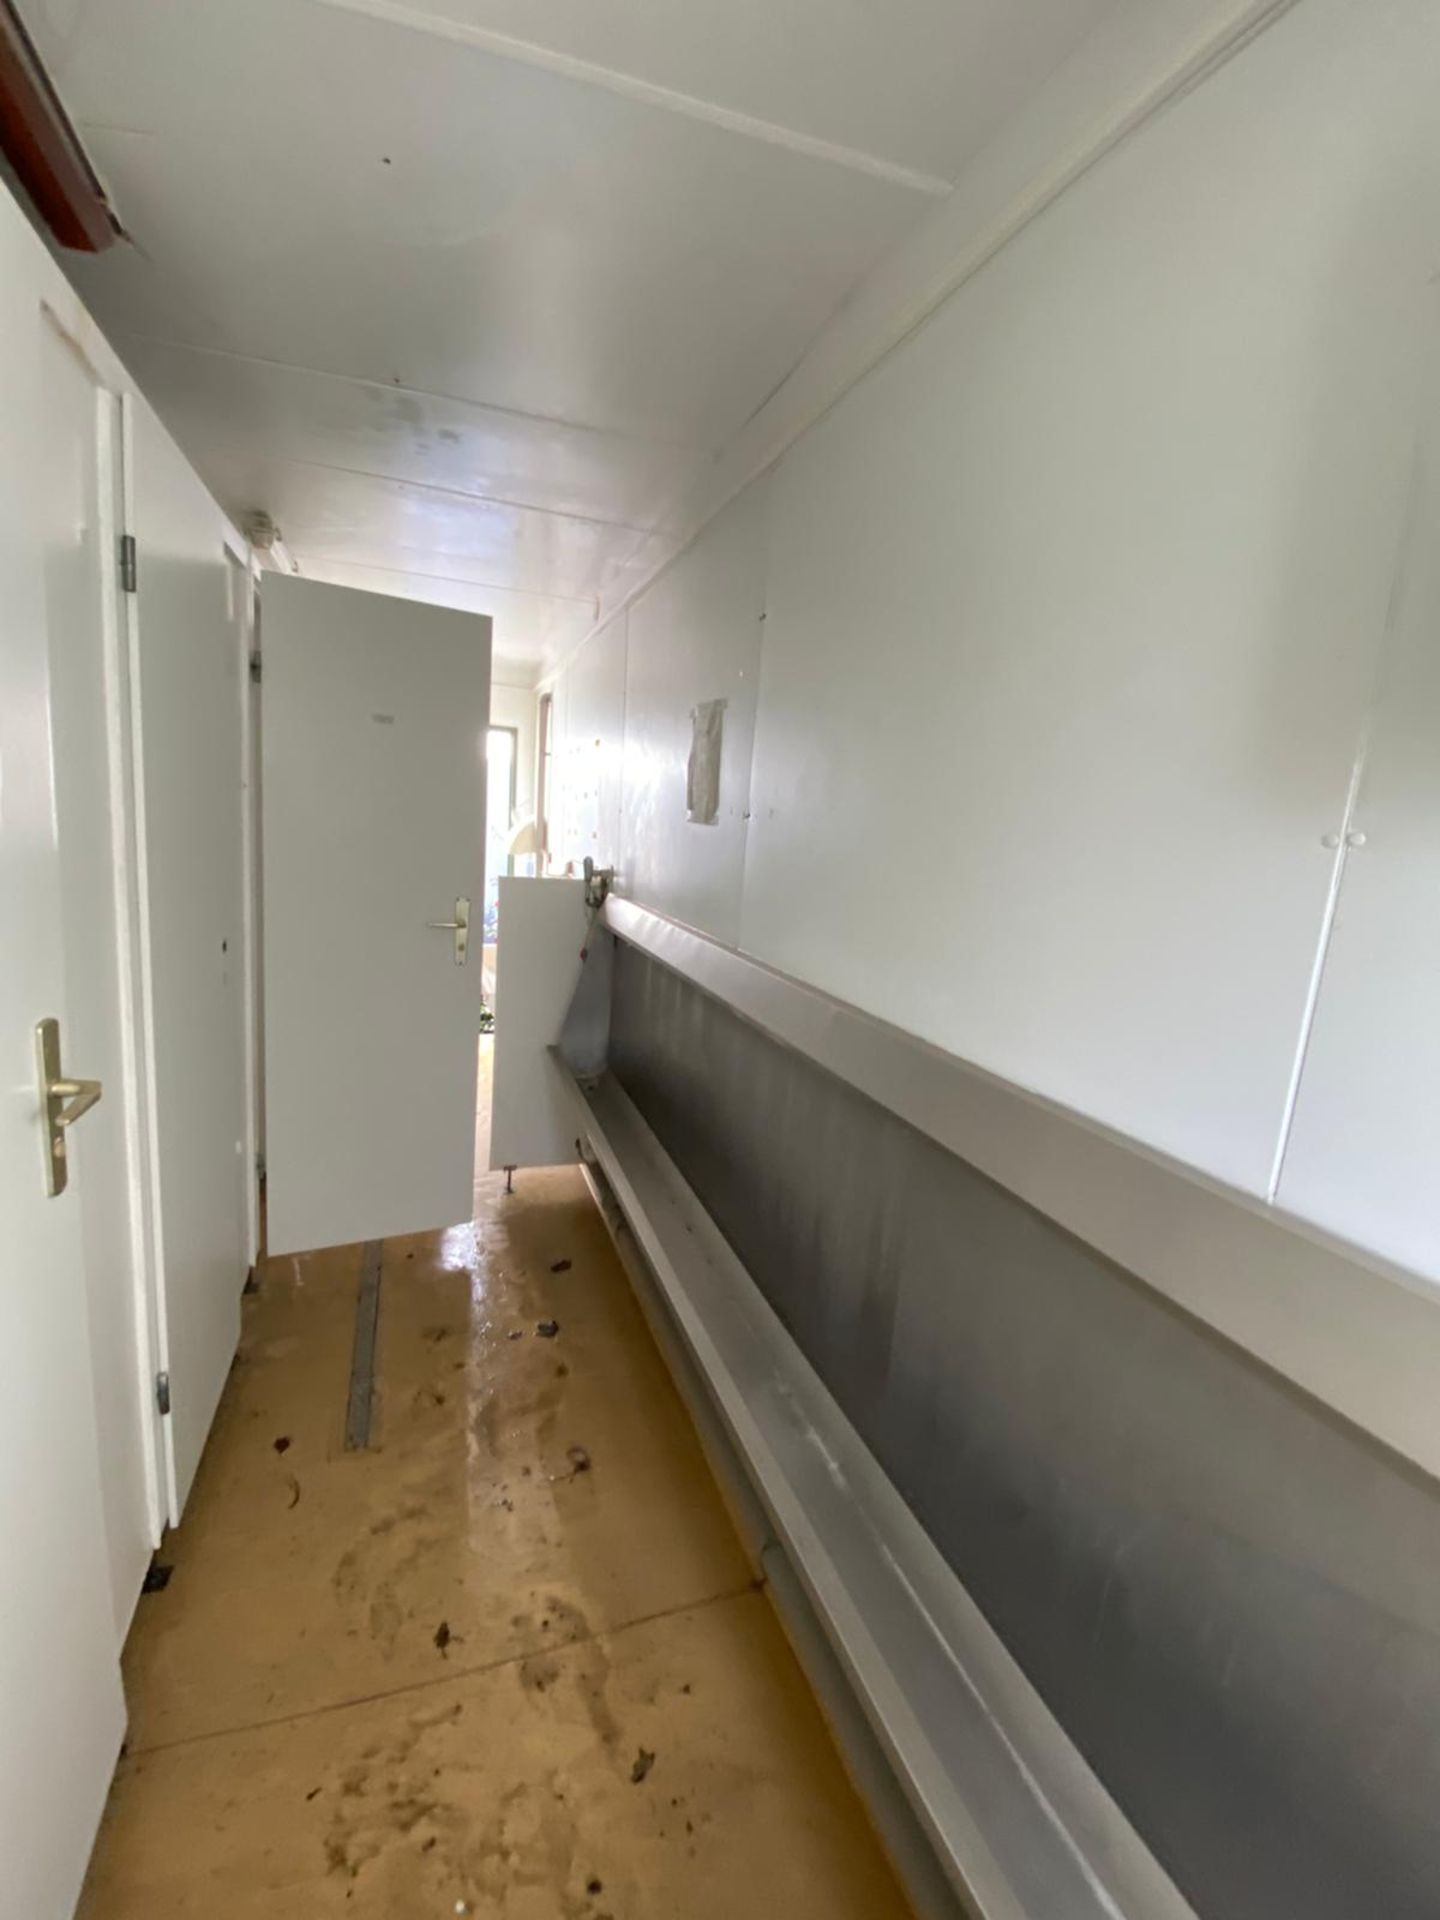 20ft toilet block container - Image 11 of 15